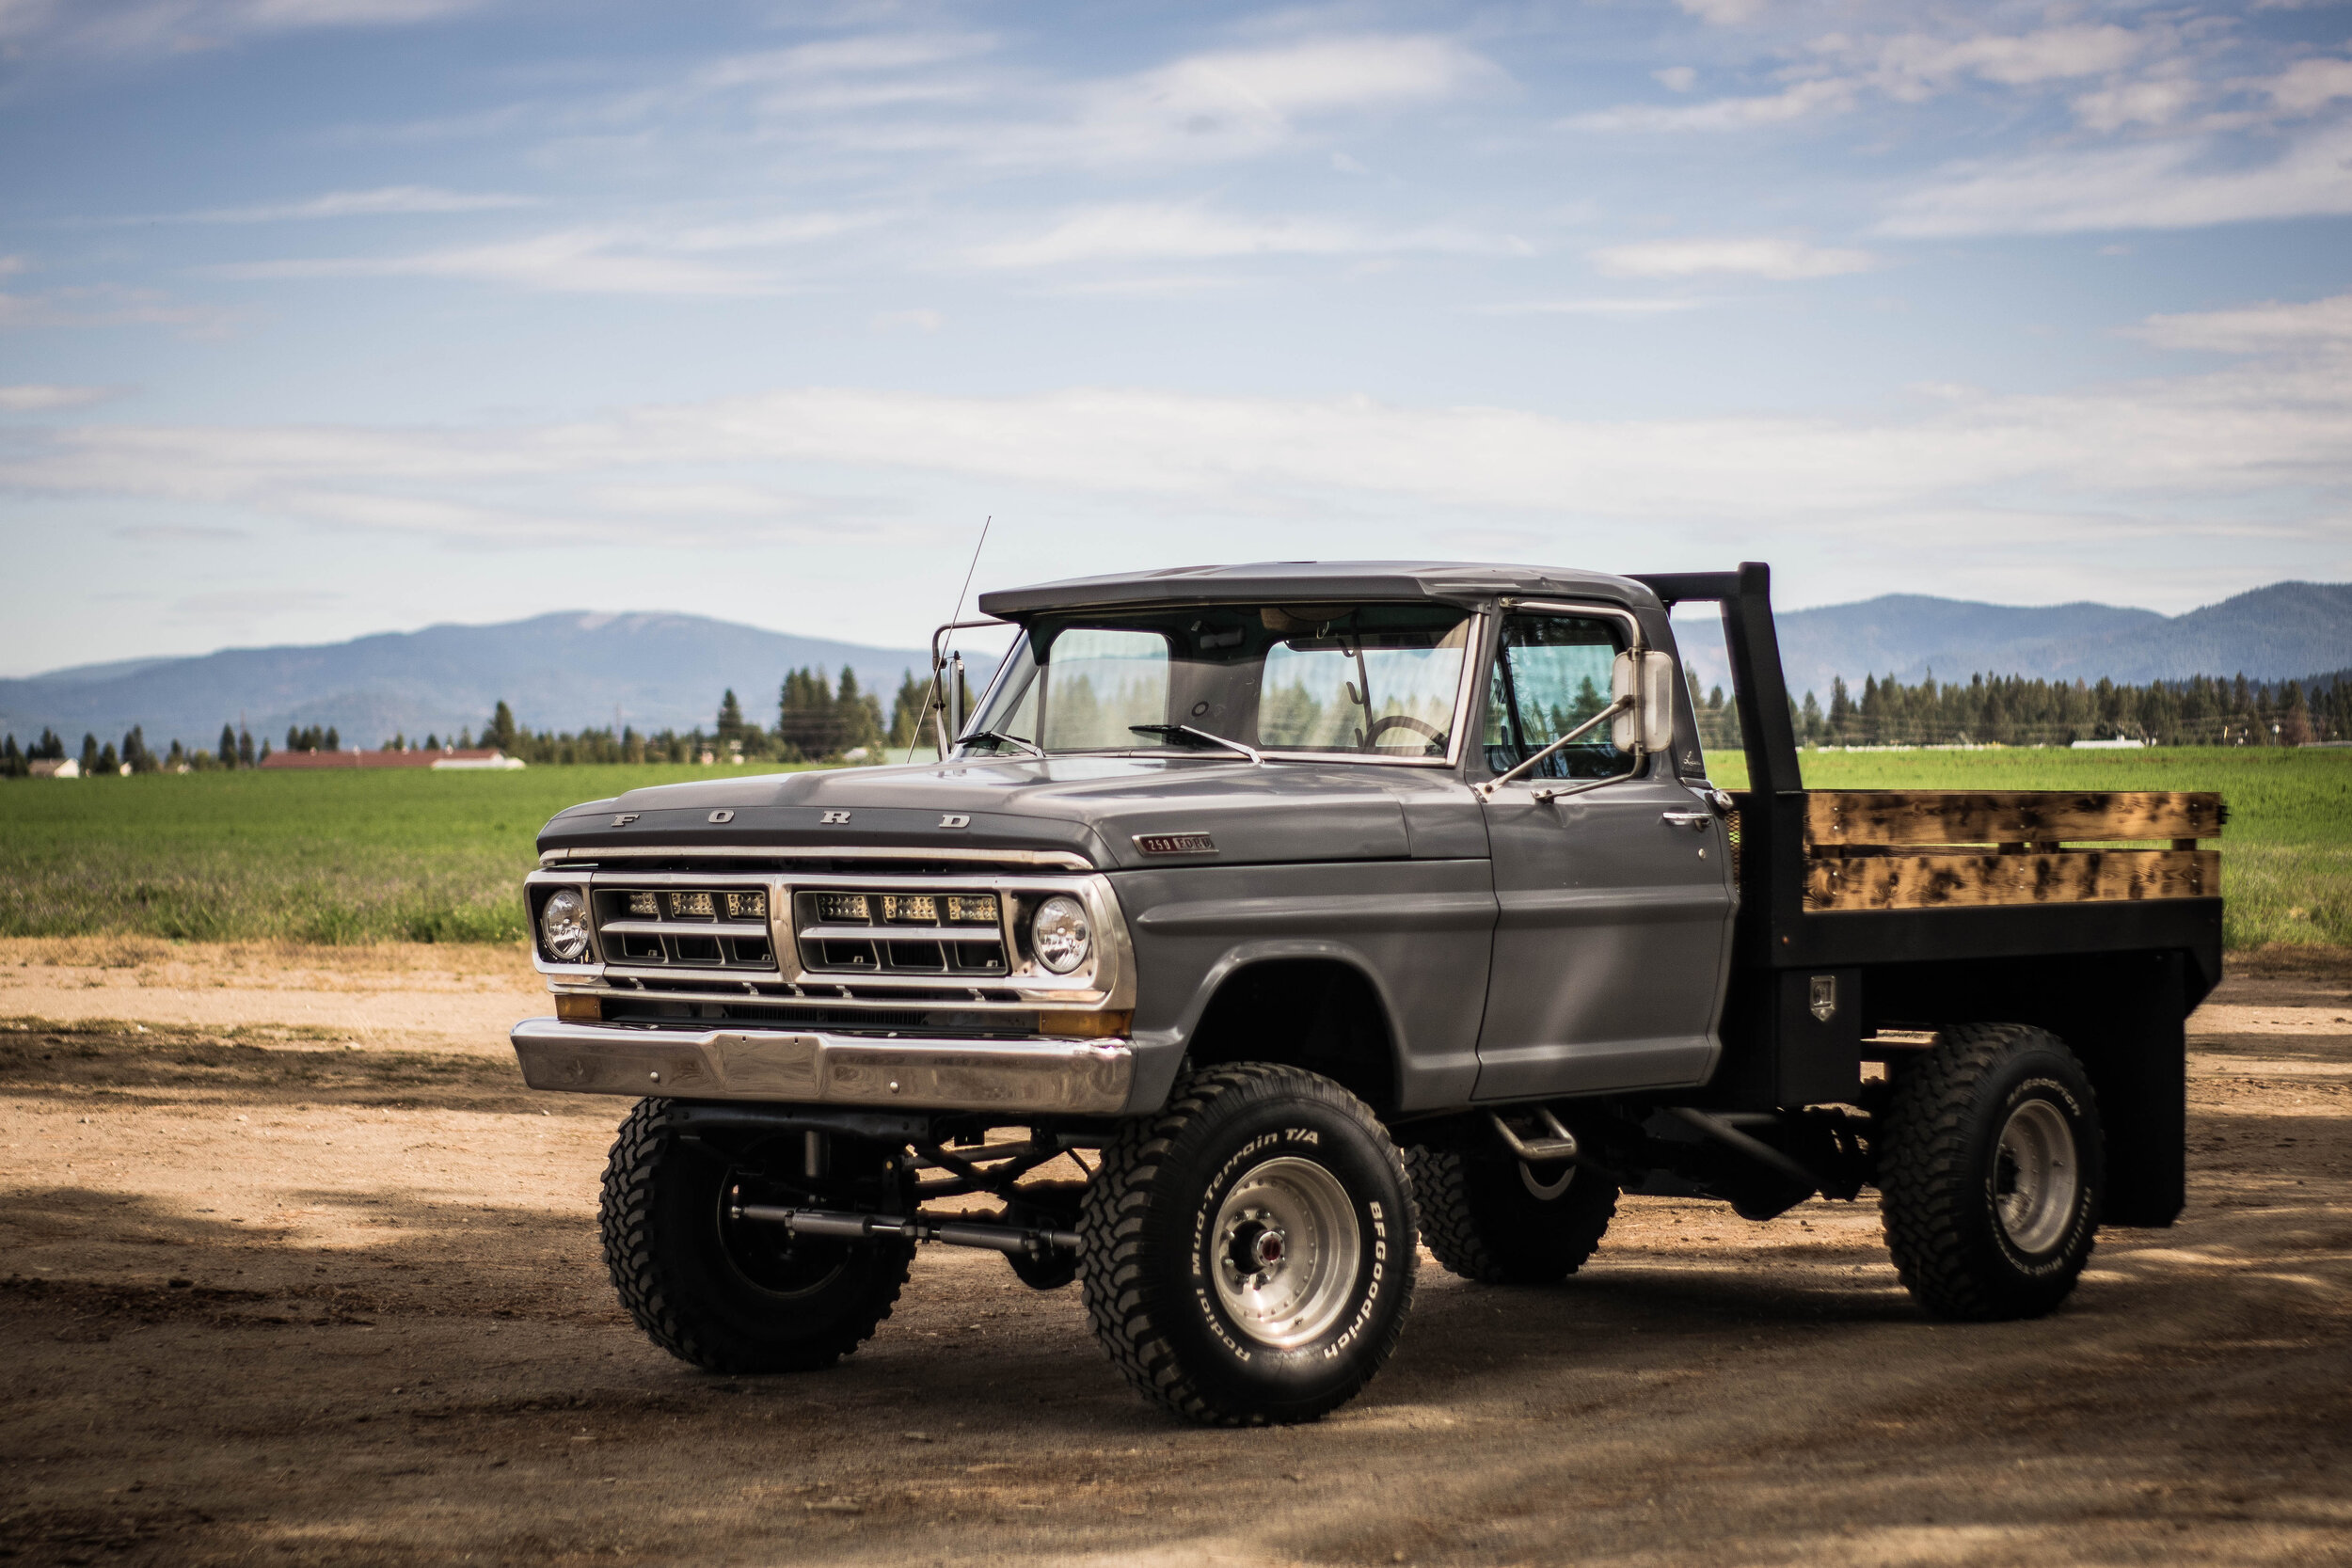  High capability was the drive behind the stance on this rig. Up here in north Idaho, it’s easy to find yourself on what could more or less be called a “road” with zero cell reception and even less chance of seeing another motorist. So the ability to